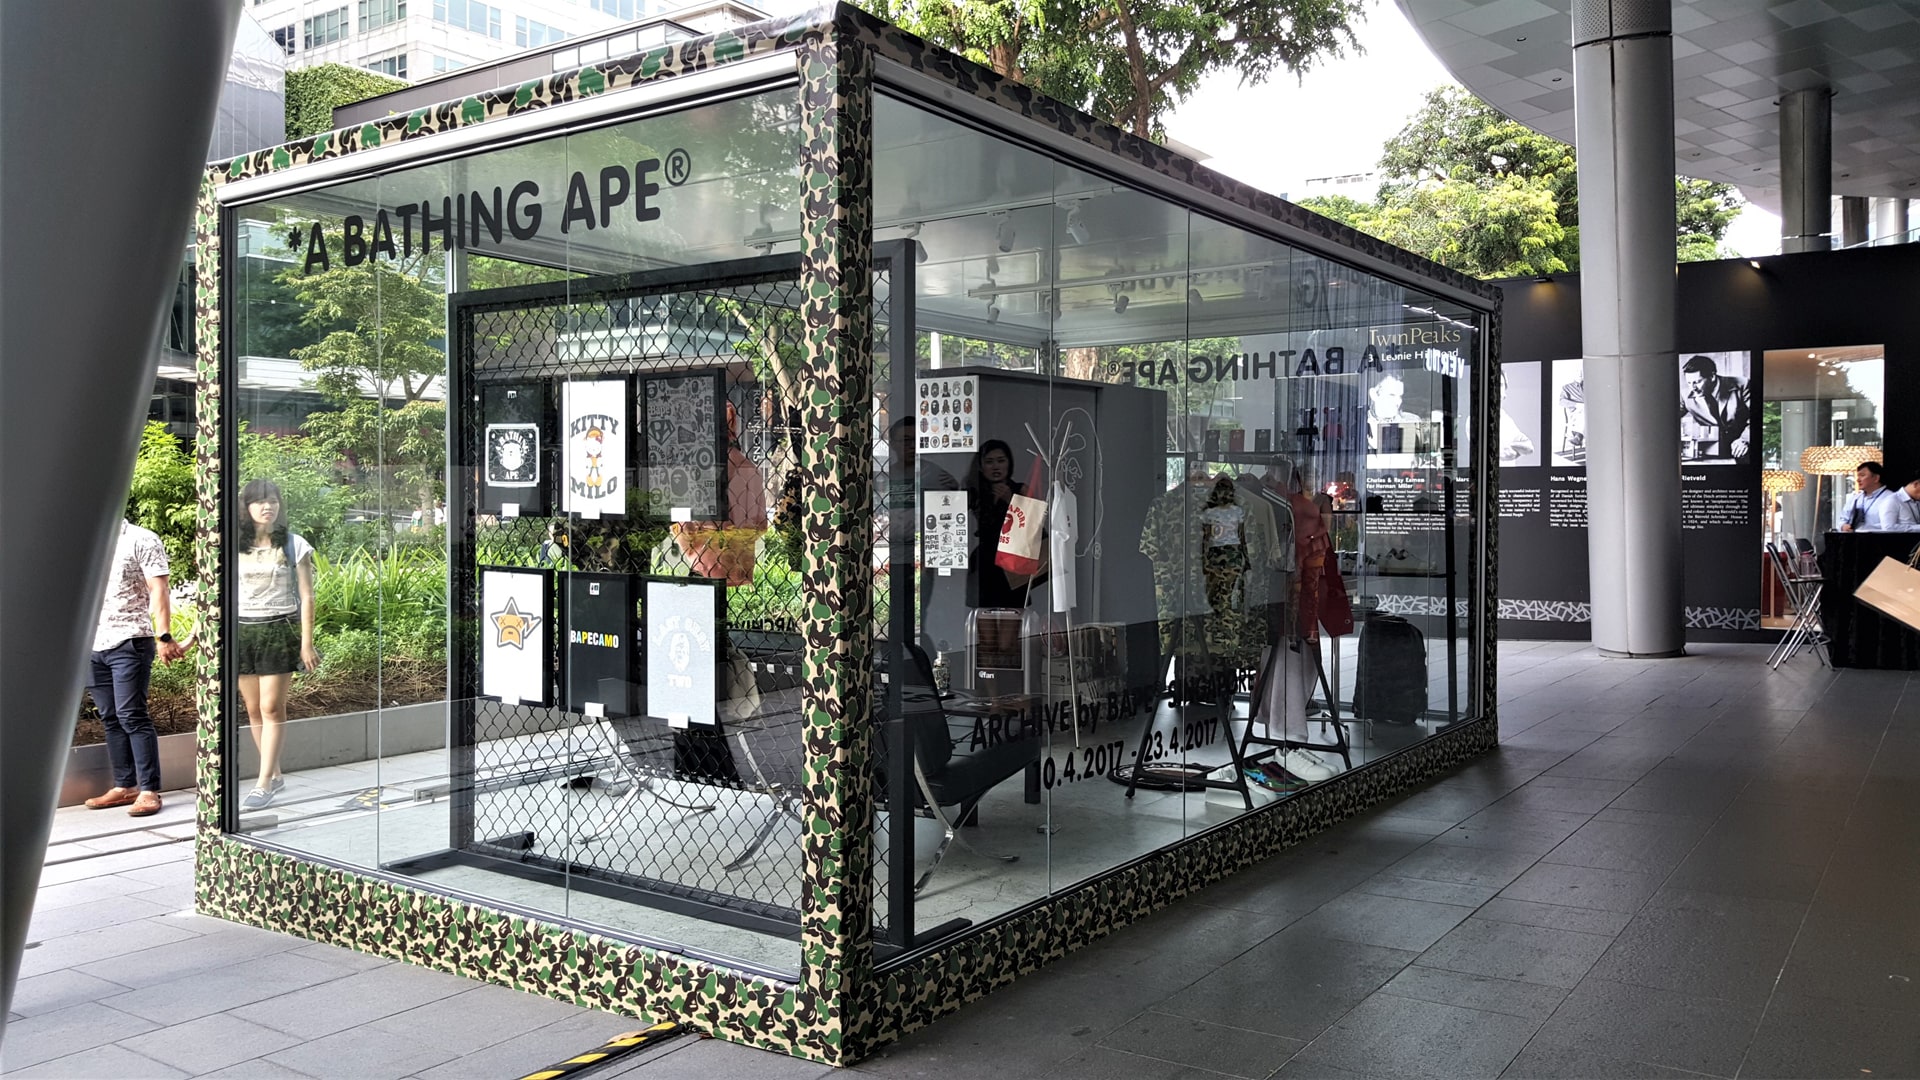 tsc_opt-images_tubelar-system_a-bathing-ape-popup-store-1920x1080-03-min